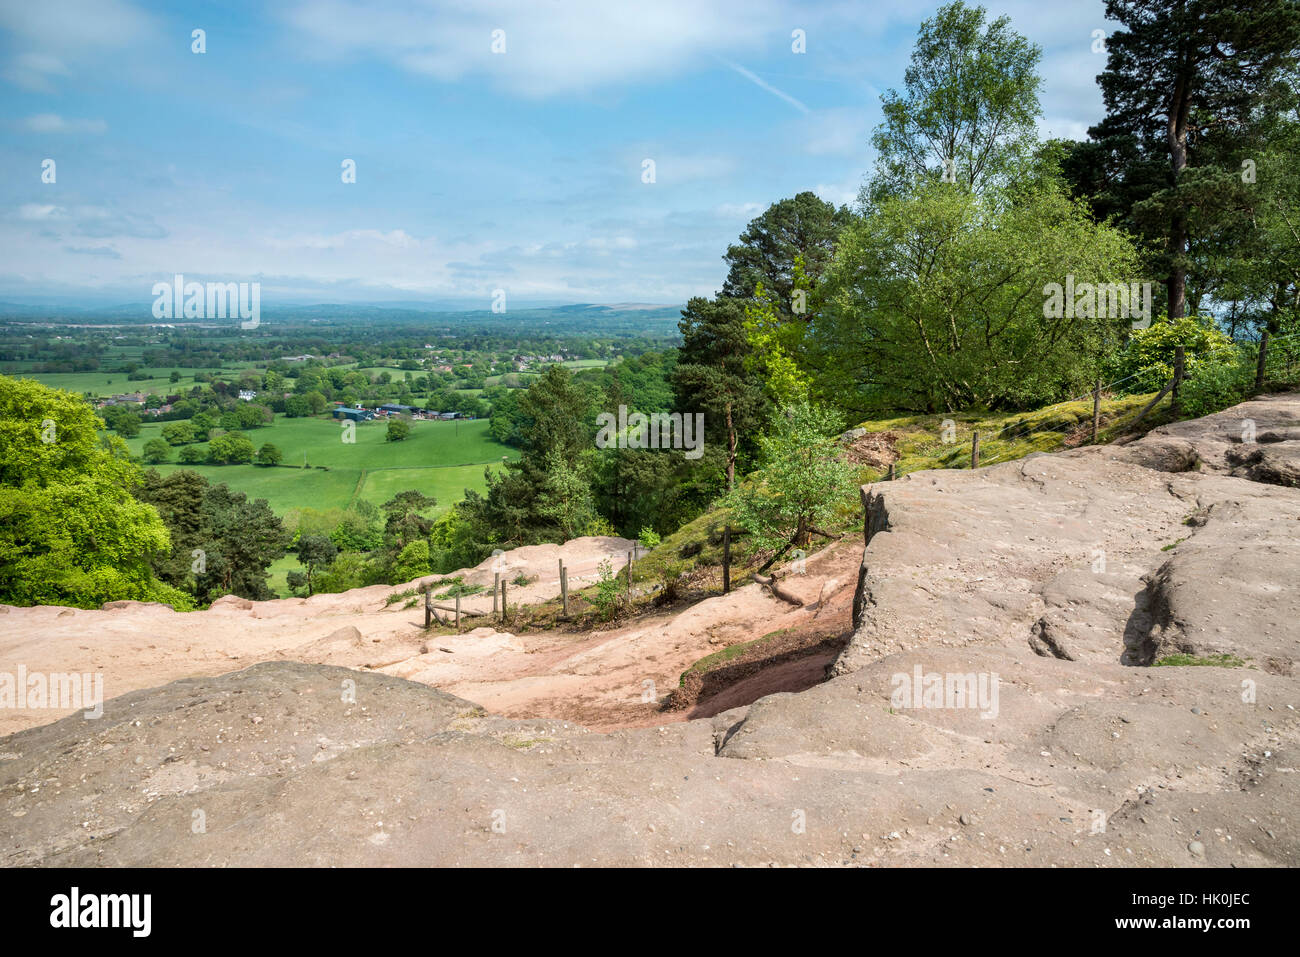 View from Stormy point at Alderley edge. View of the Cheshire countryside on a summer day. Stock Photo